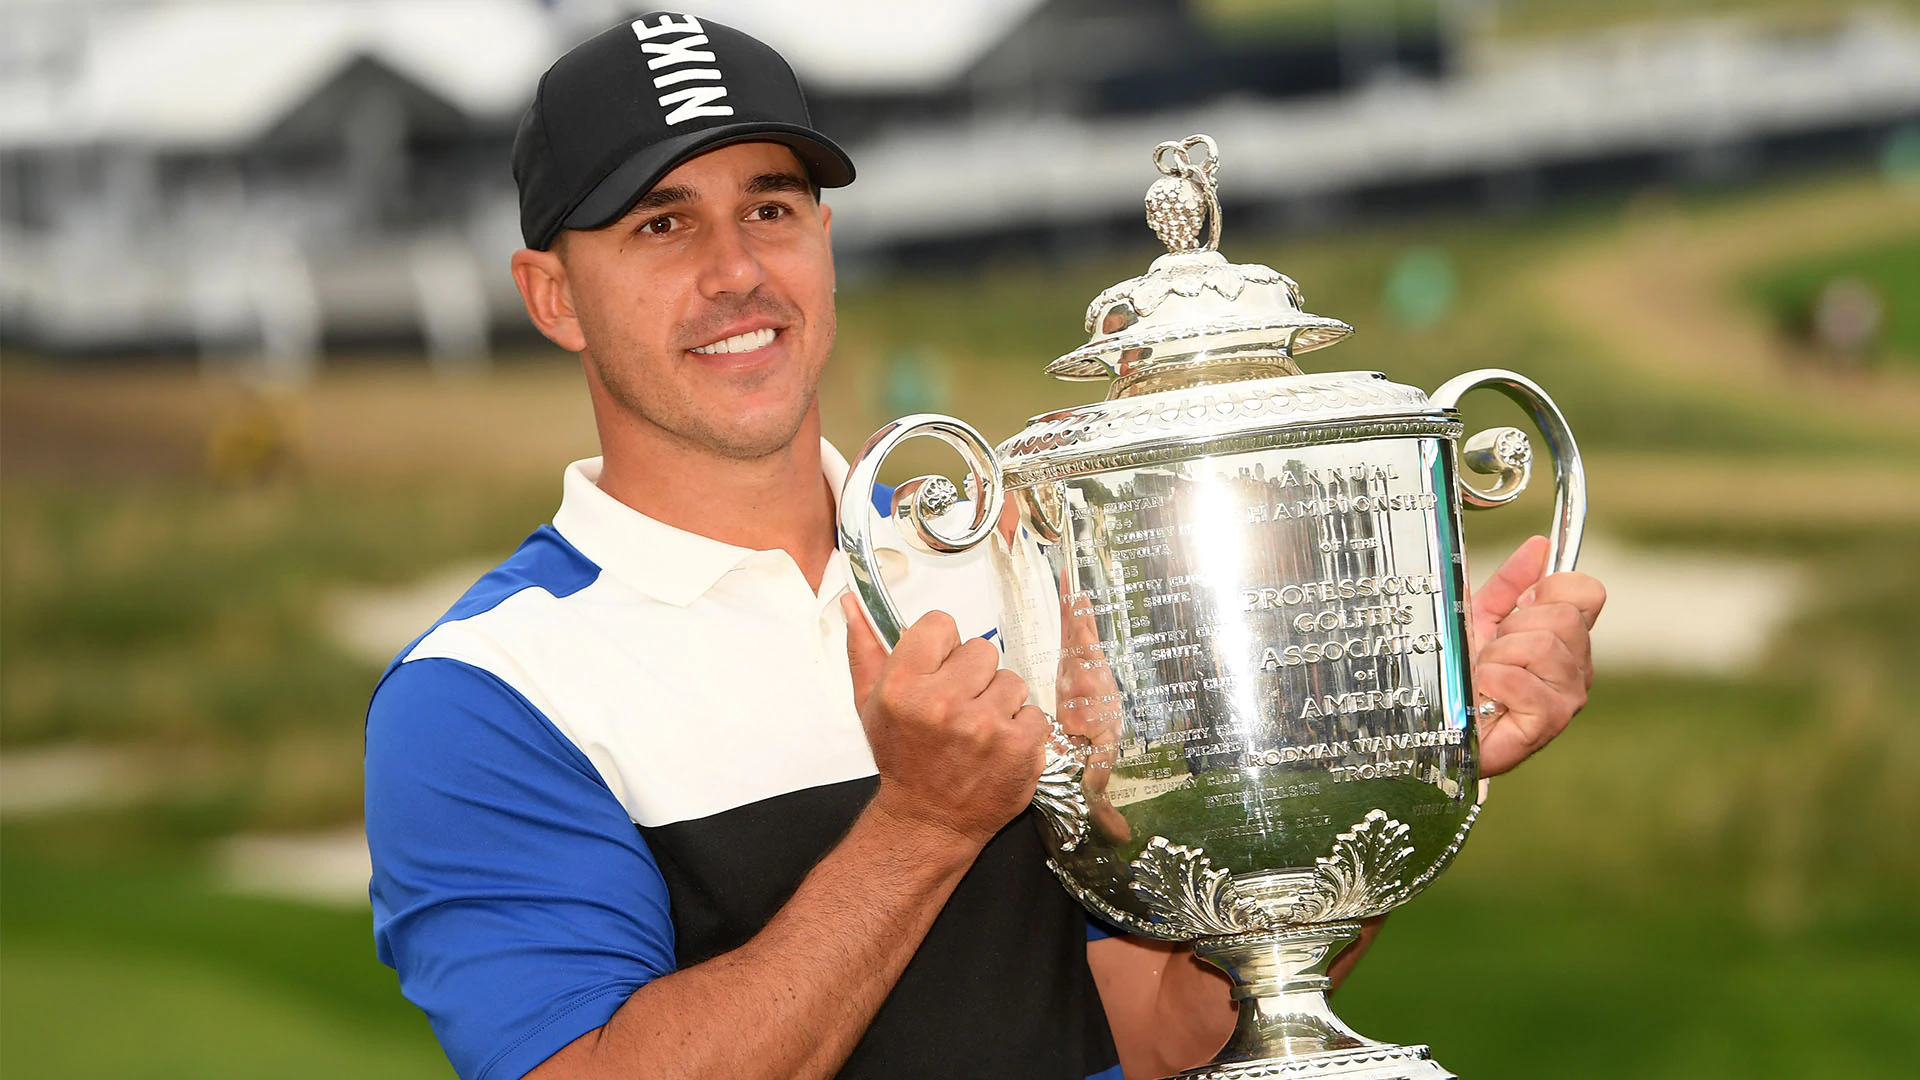 Punch Shot: Considering a Brooks Koepka three-peat at the PGA Chmpionship